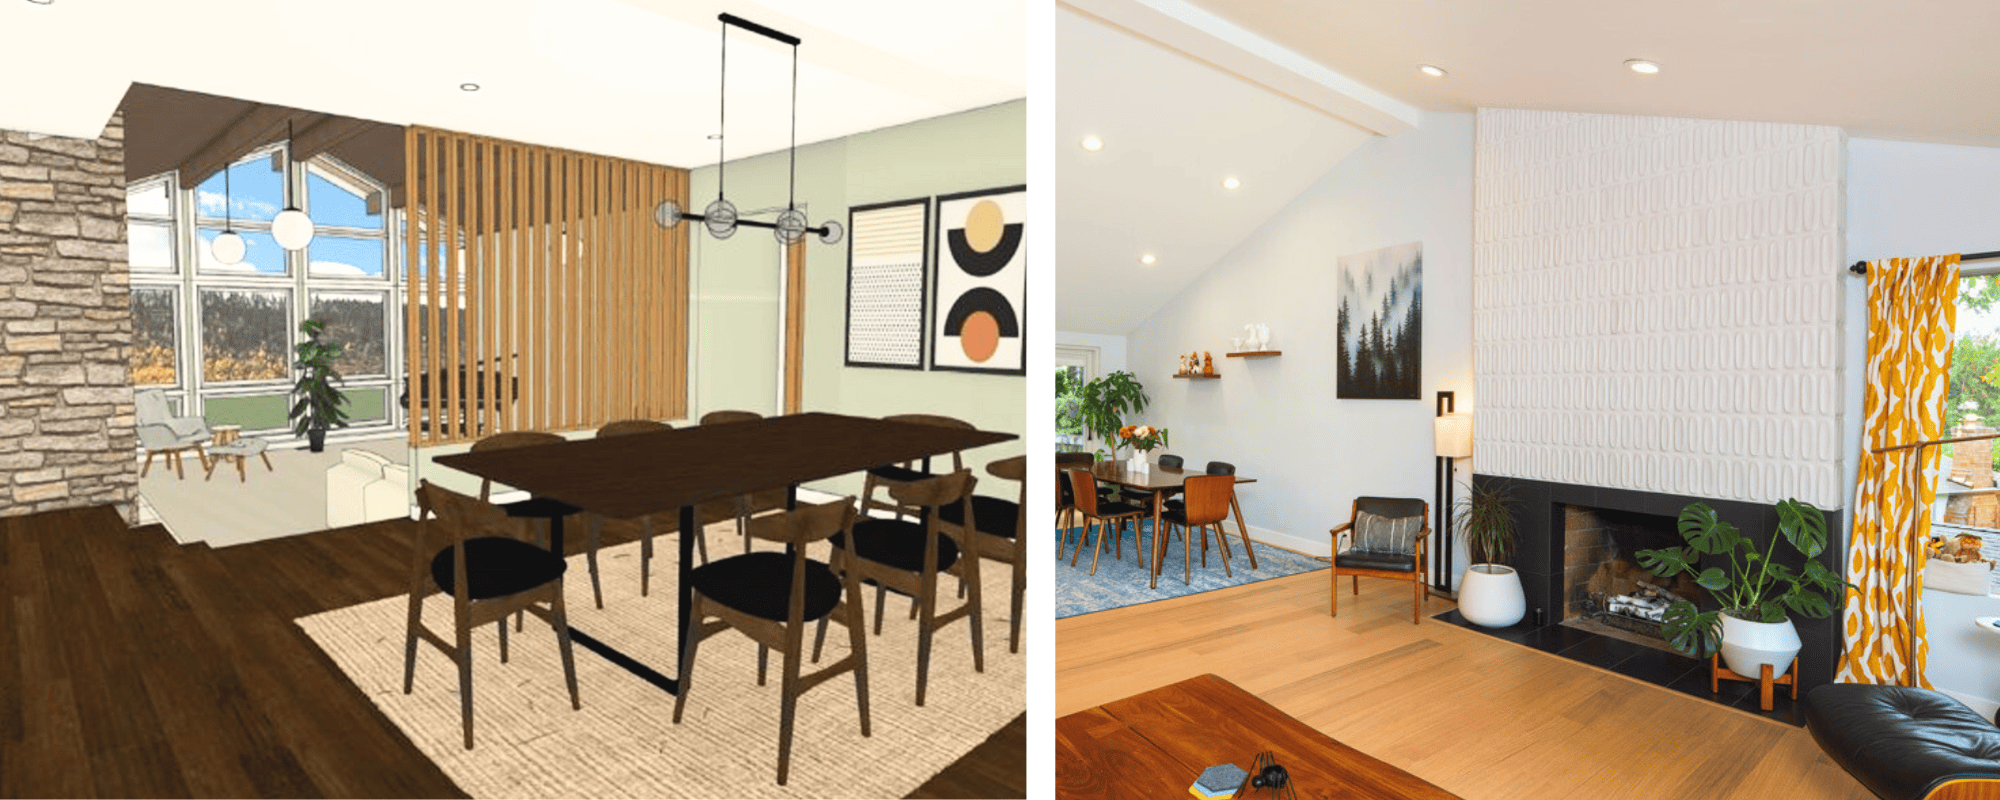 One photo and one rendering of trendy home design ideas